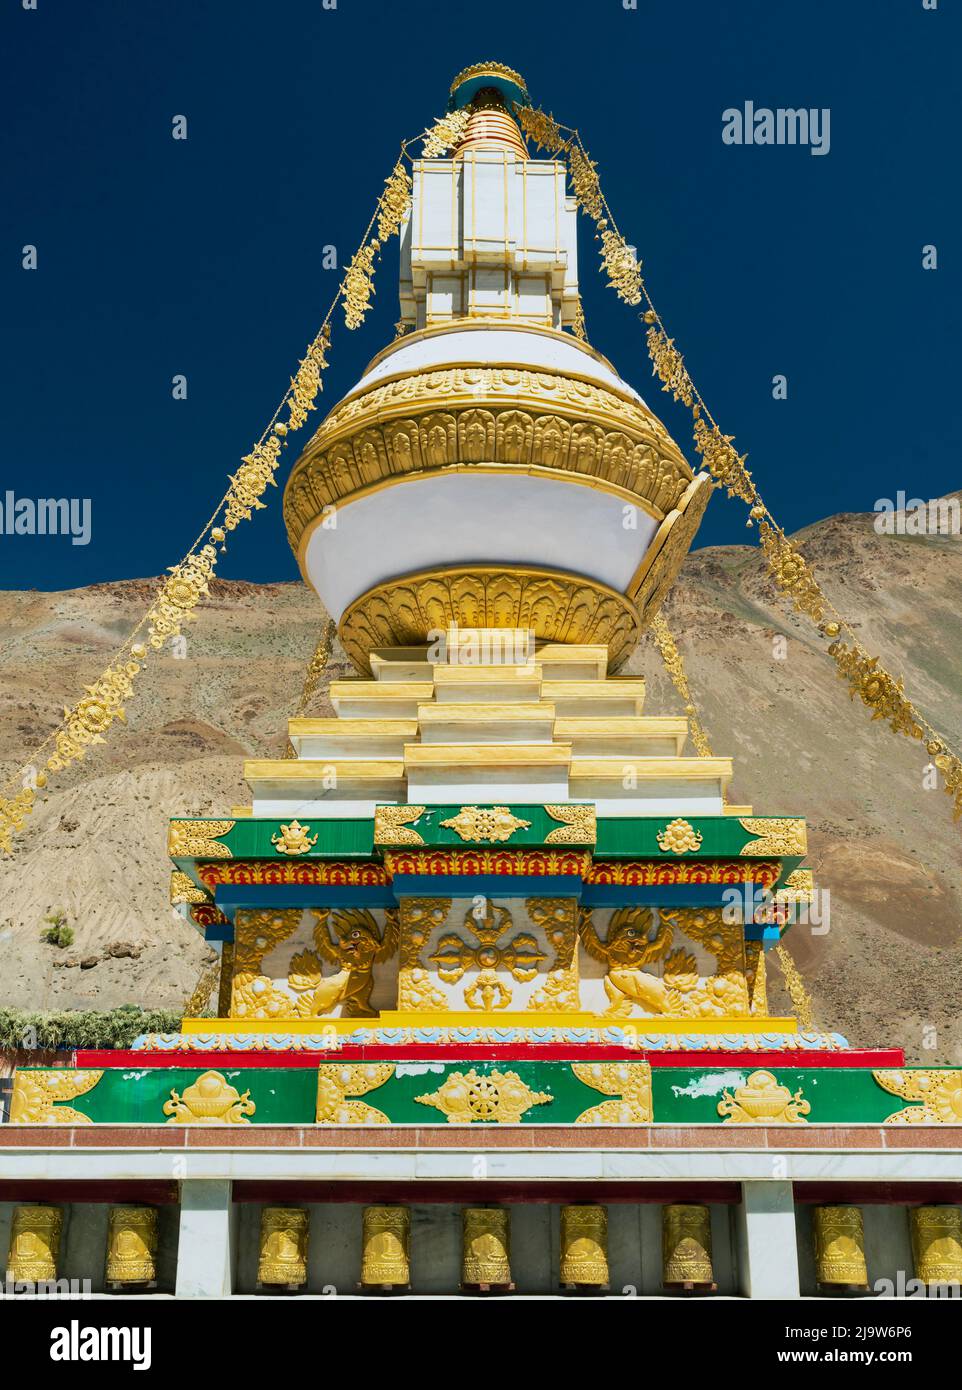 Large Buddhist stupa in beautiful colours inside ancient monastery with ridges of Himalayas as backdrop under blue sky. Tabo, India. Stock Photo